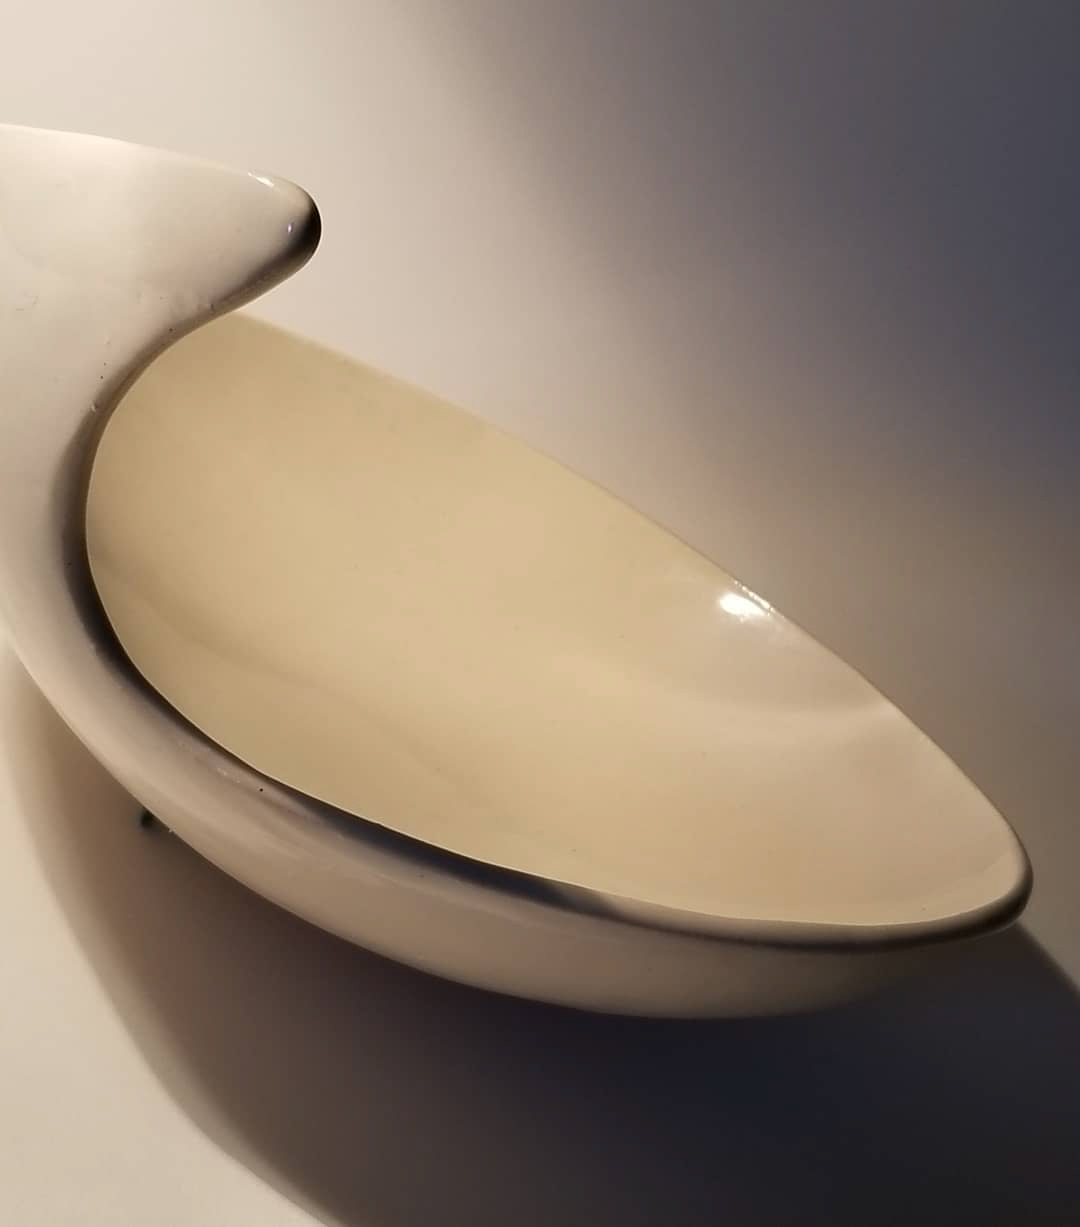 a shallow ceramic bowl with a wavelike point on one end, photographed at a dramatic angle